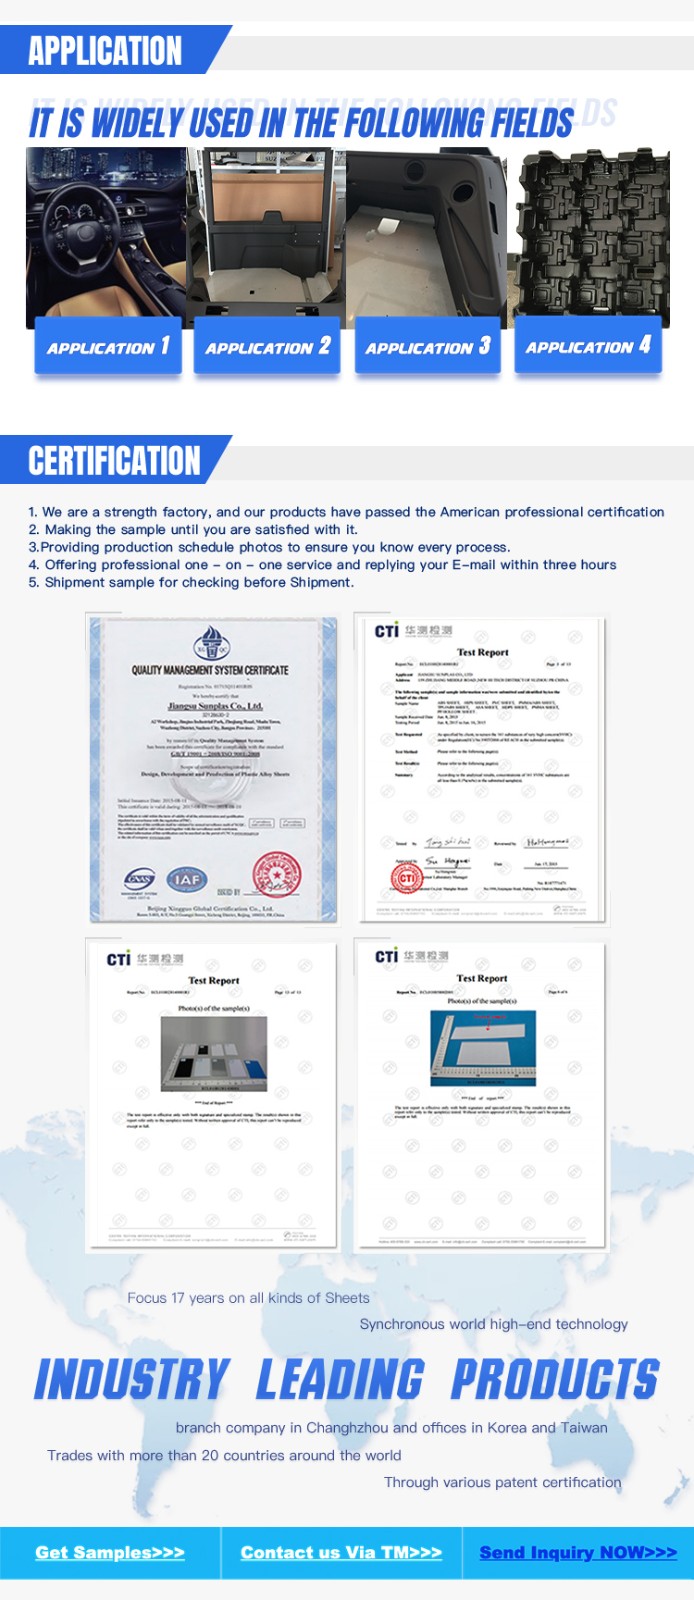 Applications and certifications for